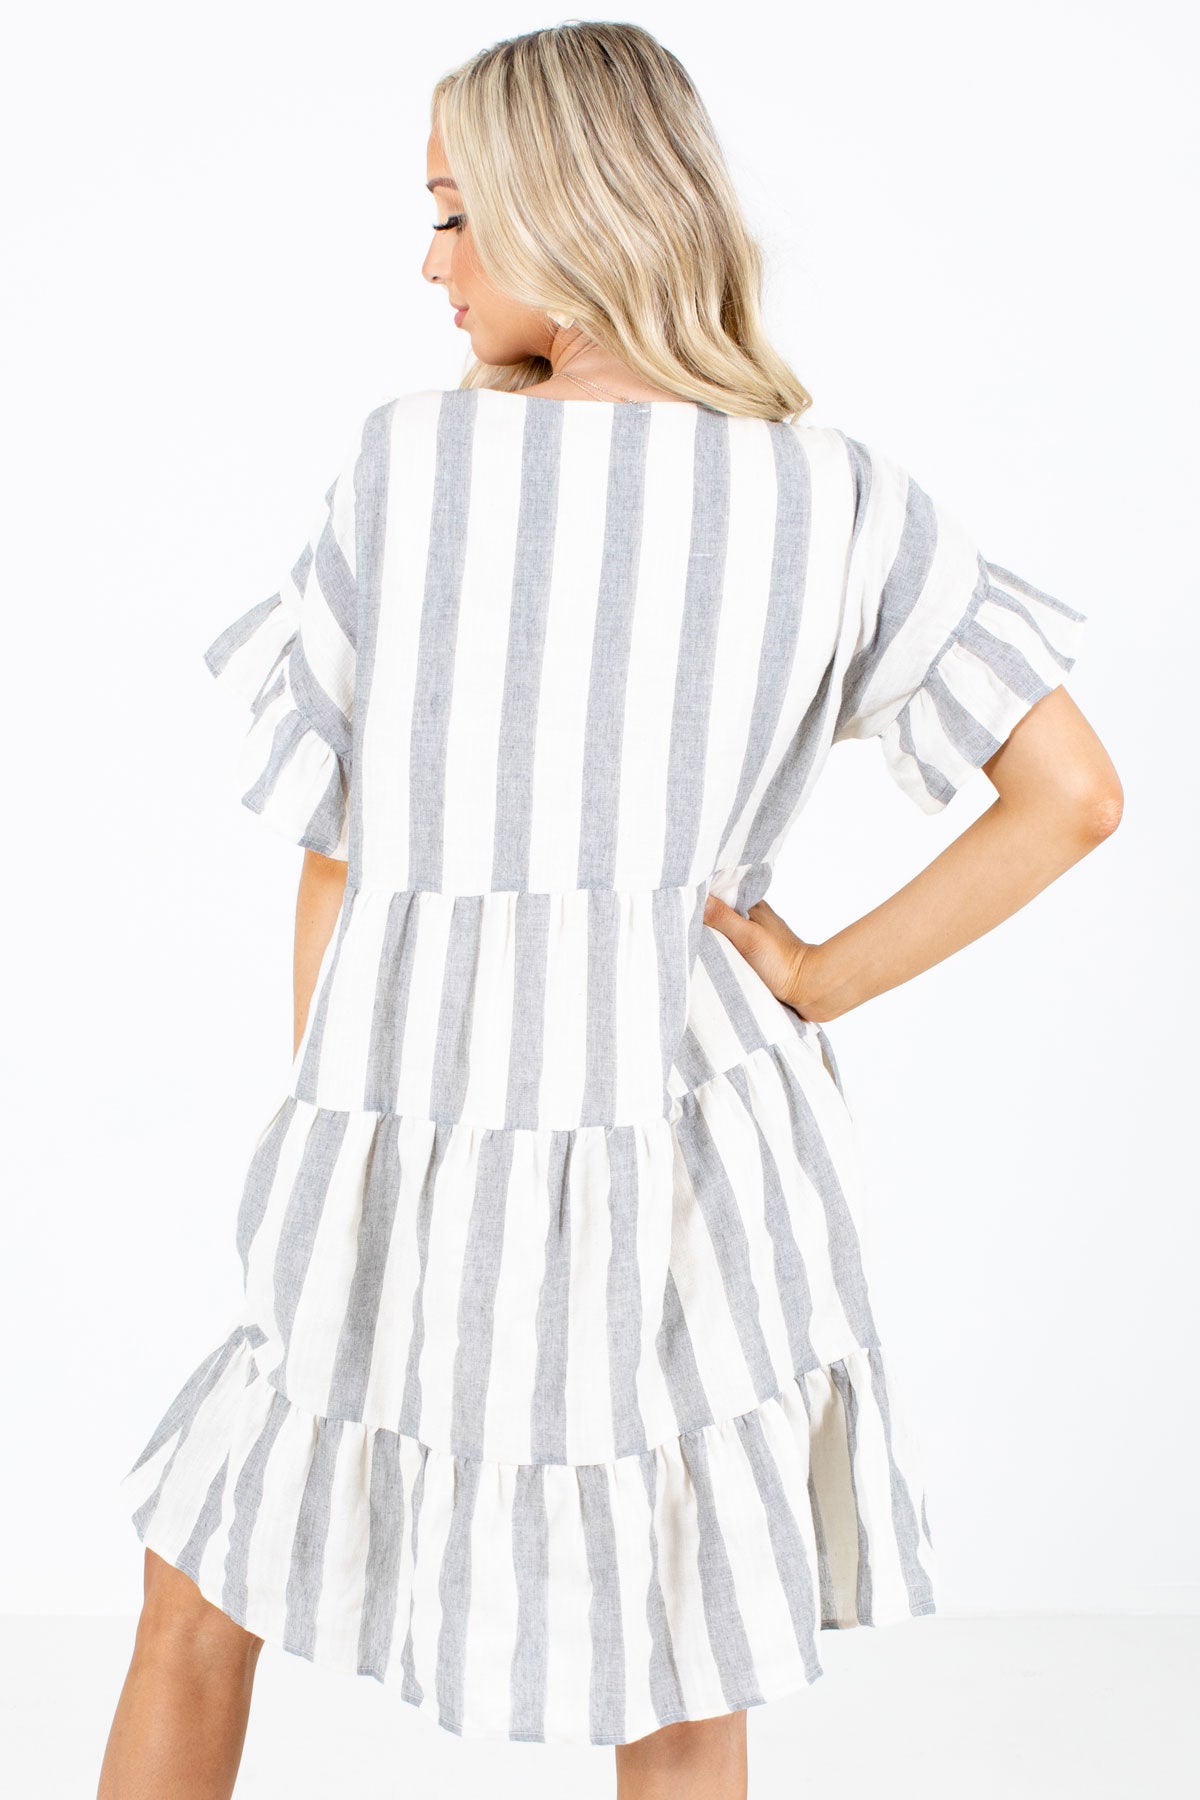 Striped Short Dress in Gray and White with Flutter Sleeves